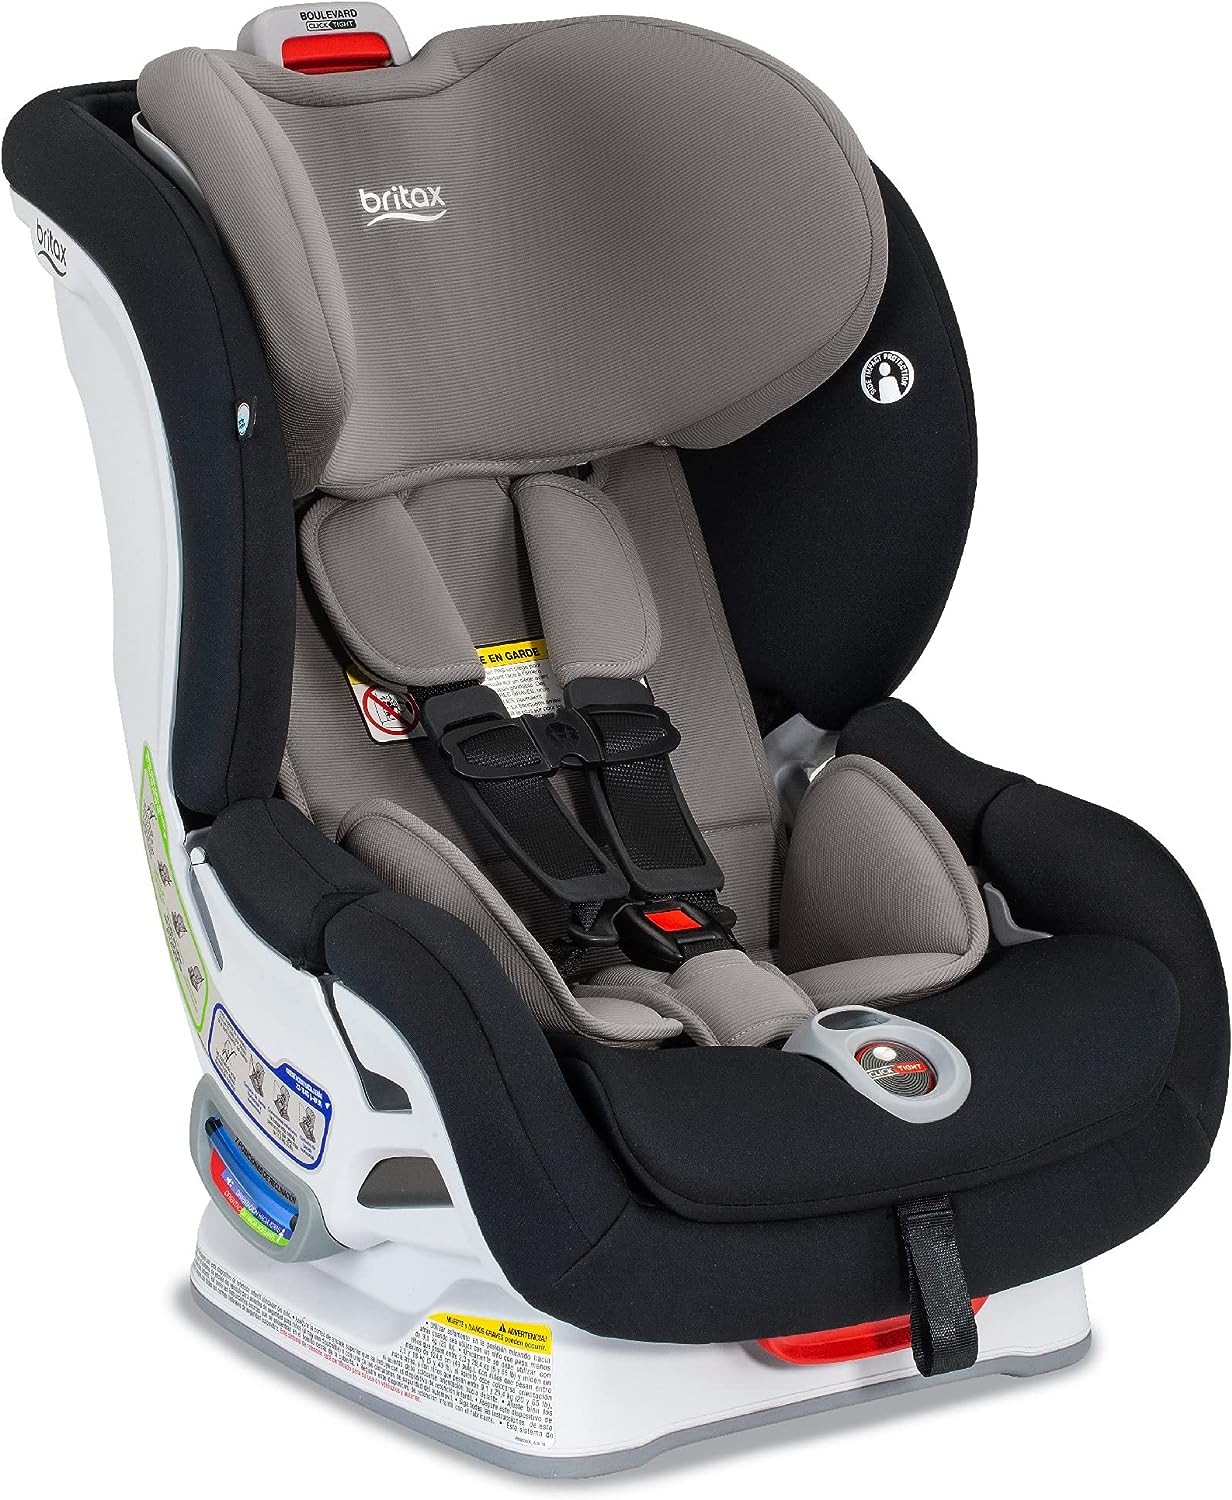 Britax Boulevard Convertible Car Seat, 10 Years of Use, ClickTight, SafeWash, Grey Contour, Child Safety Car Seats, Infant to Toddler Car Seat